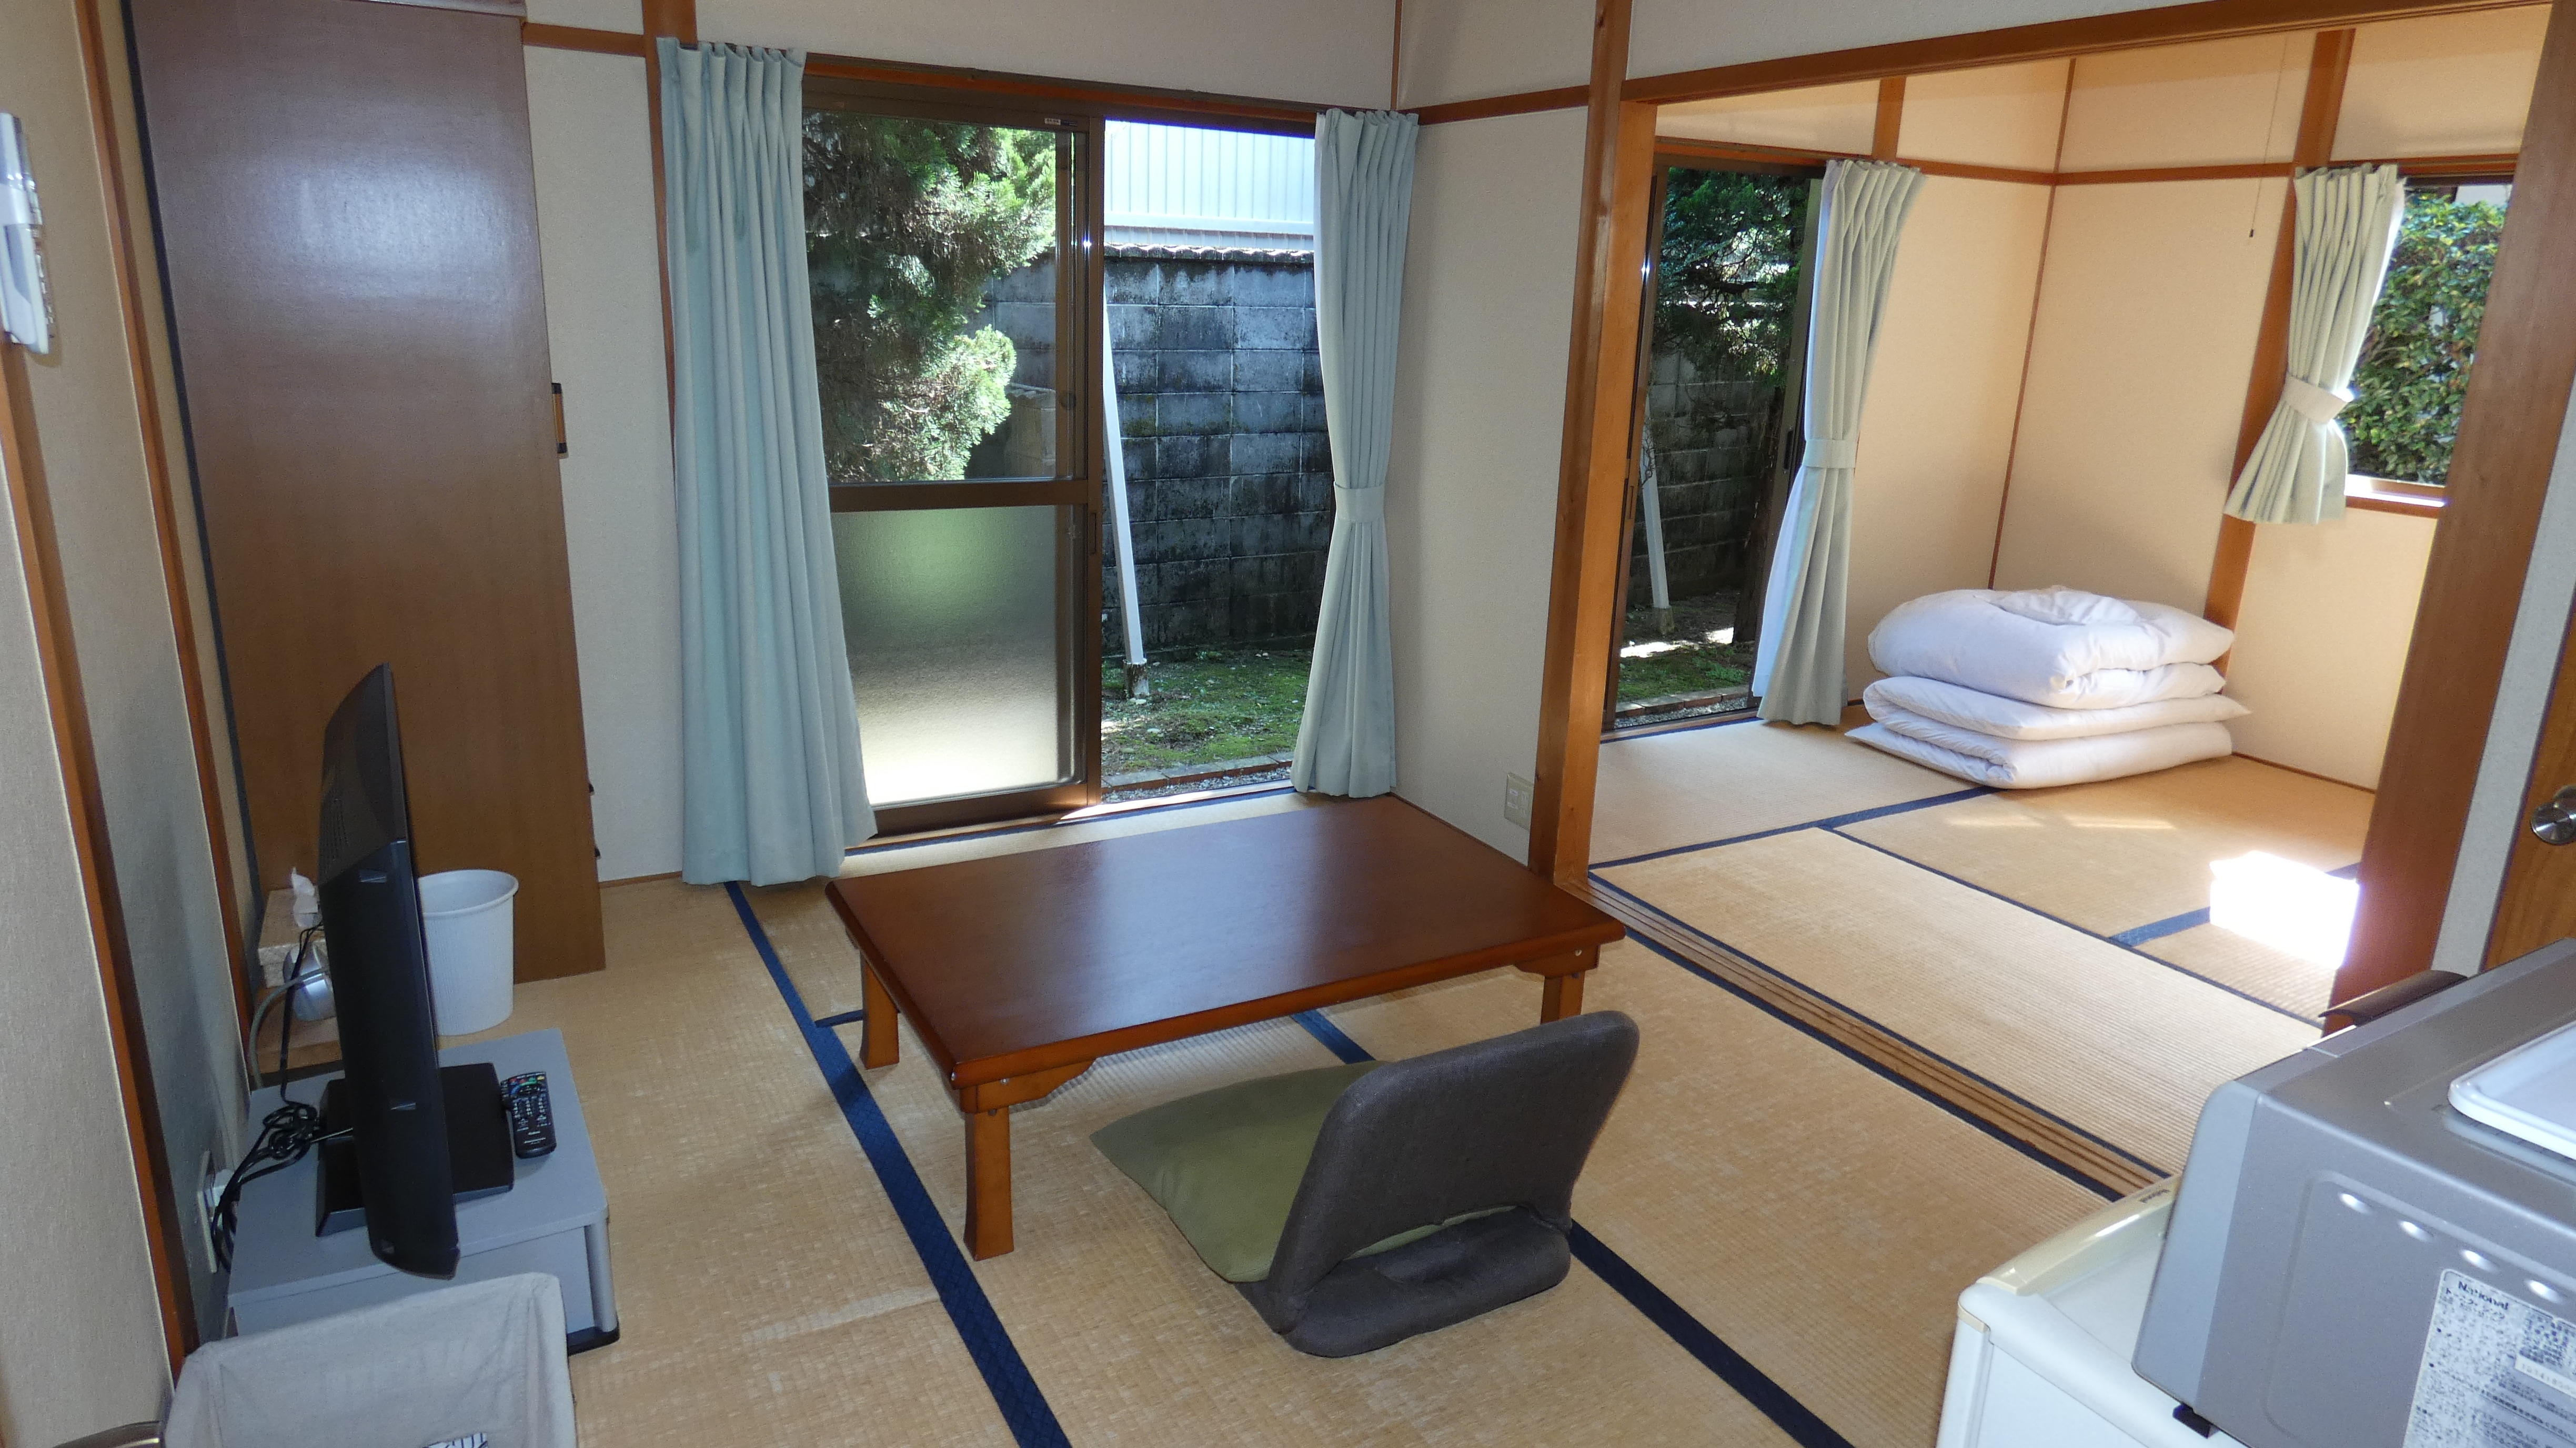 Privately reserved [Japanese-style room 10 tatami mats] Up to 4 people OK. Table space in front and sleeping space in the back.